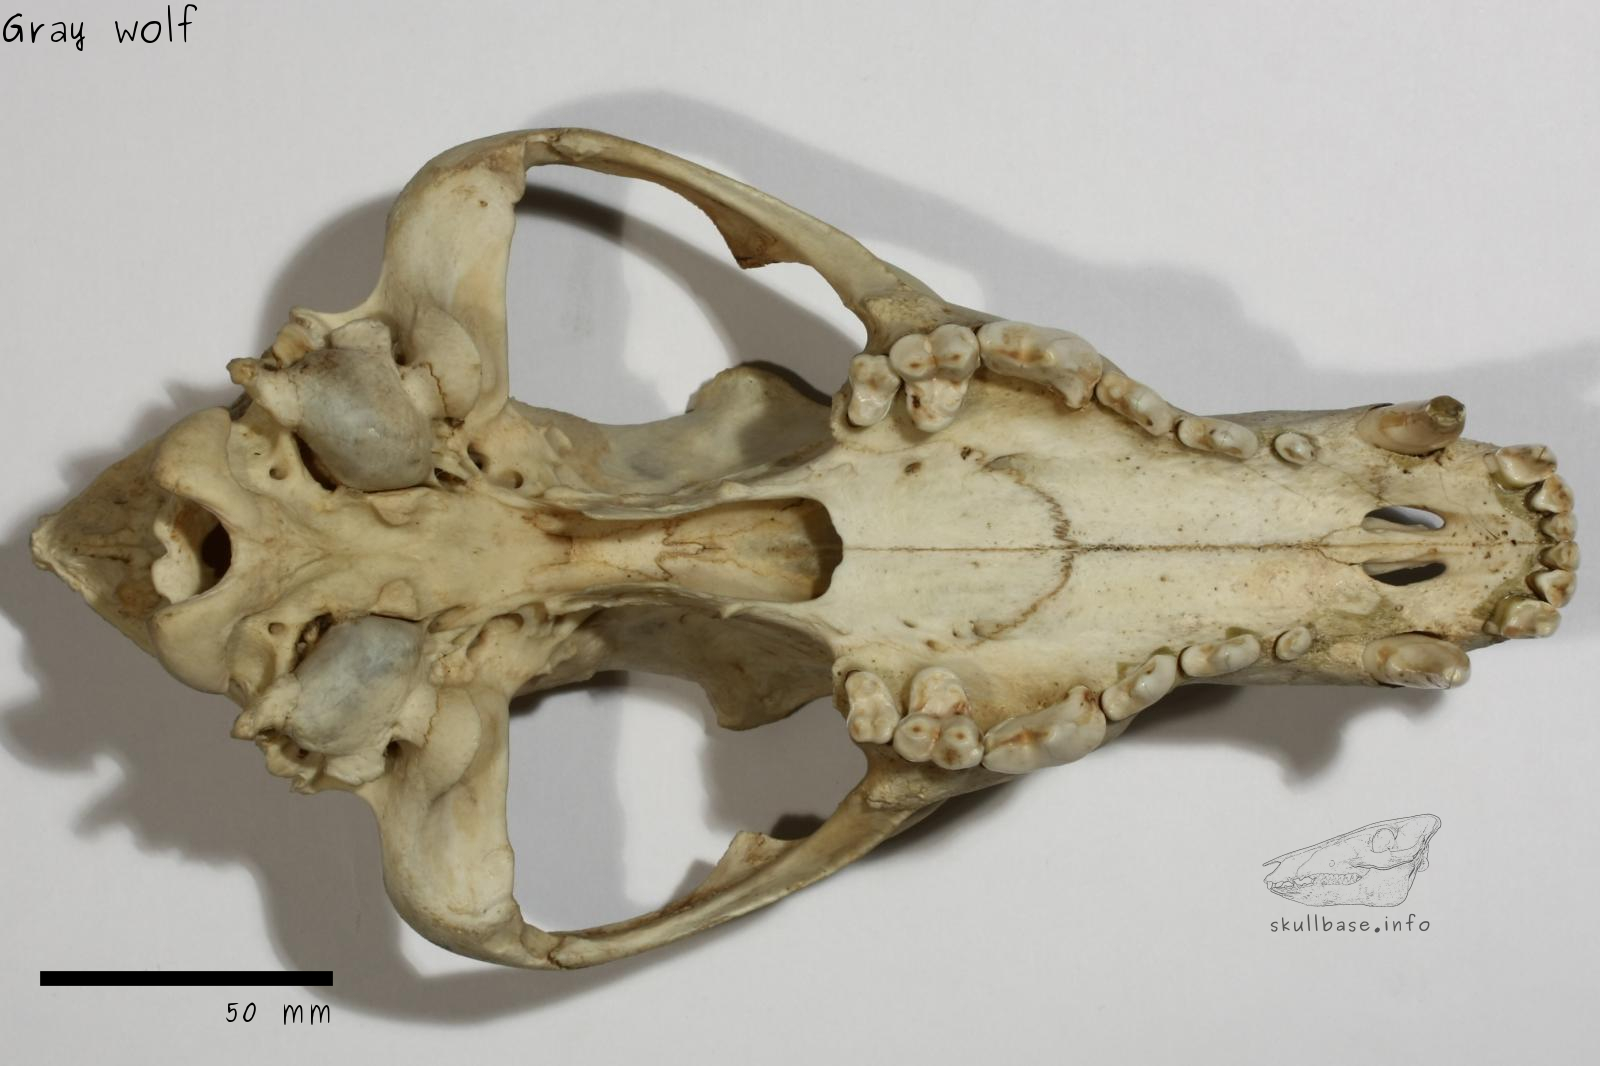 Gray wolf (Canis lupus) skull ventral view